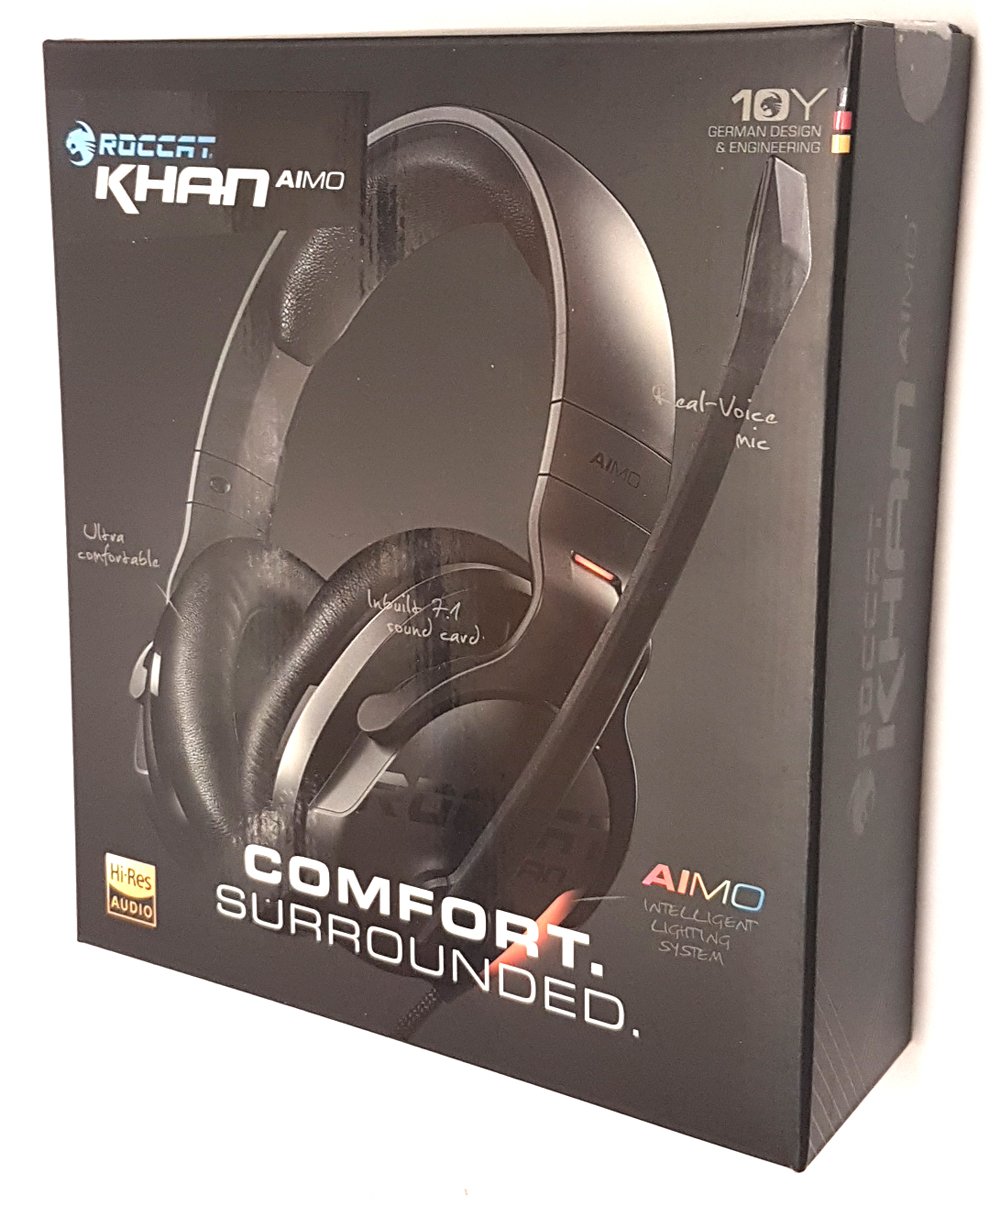 ROCCAT Khan AIMO box front